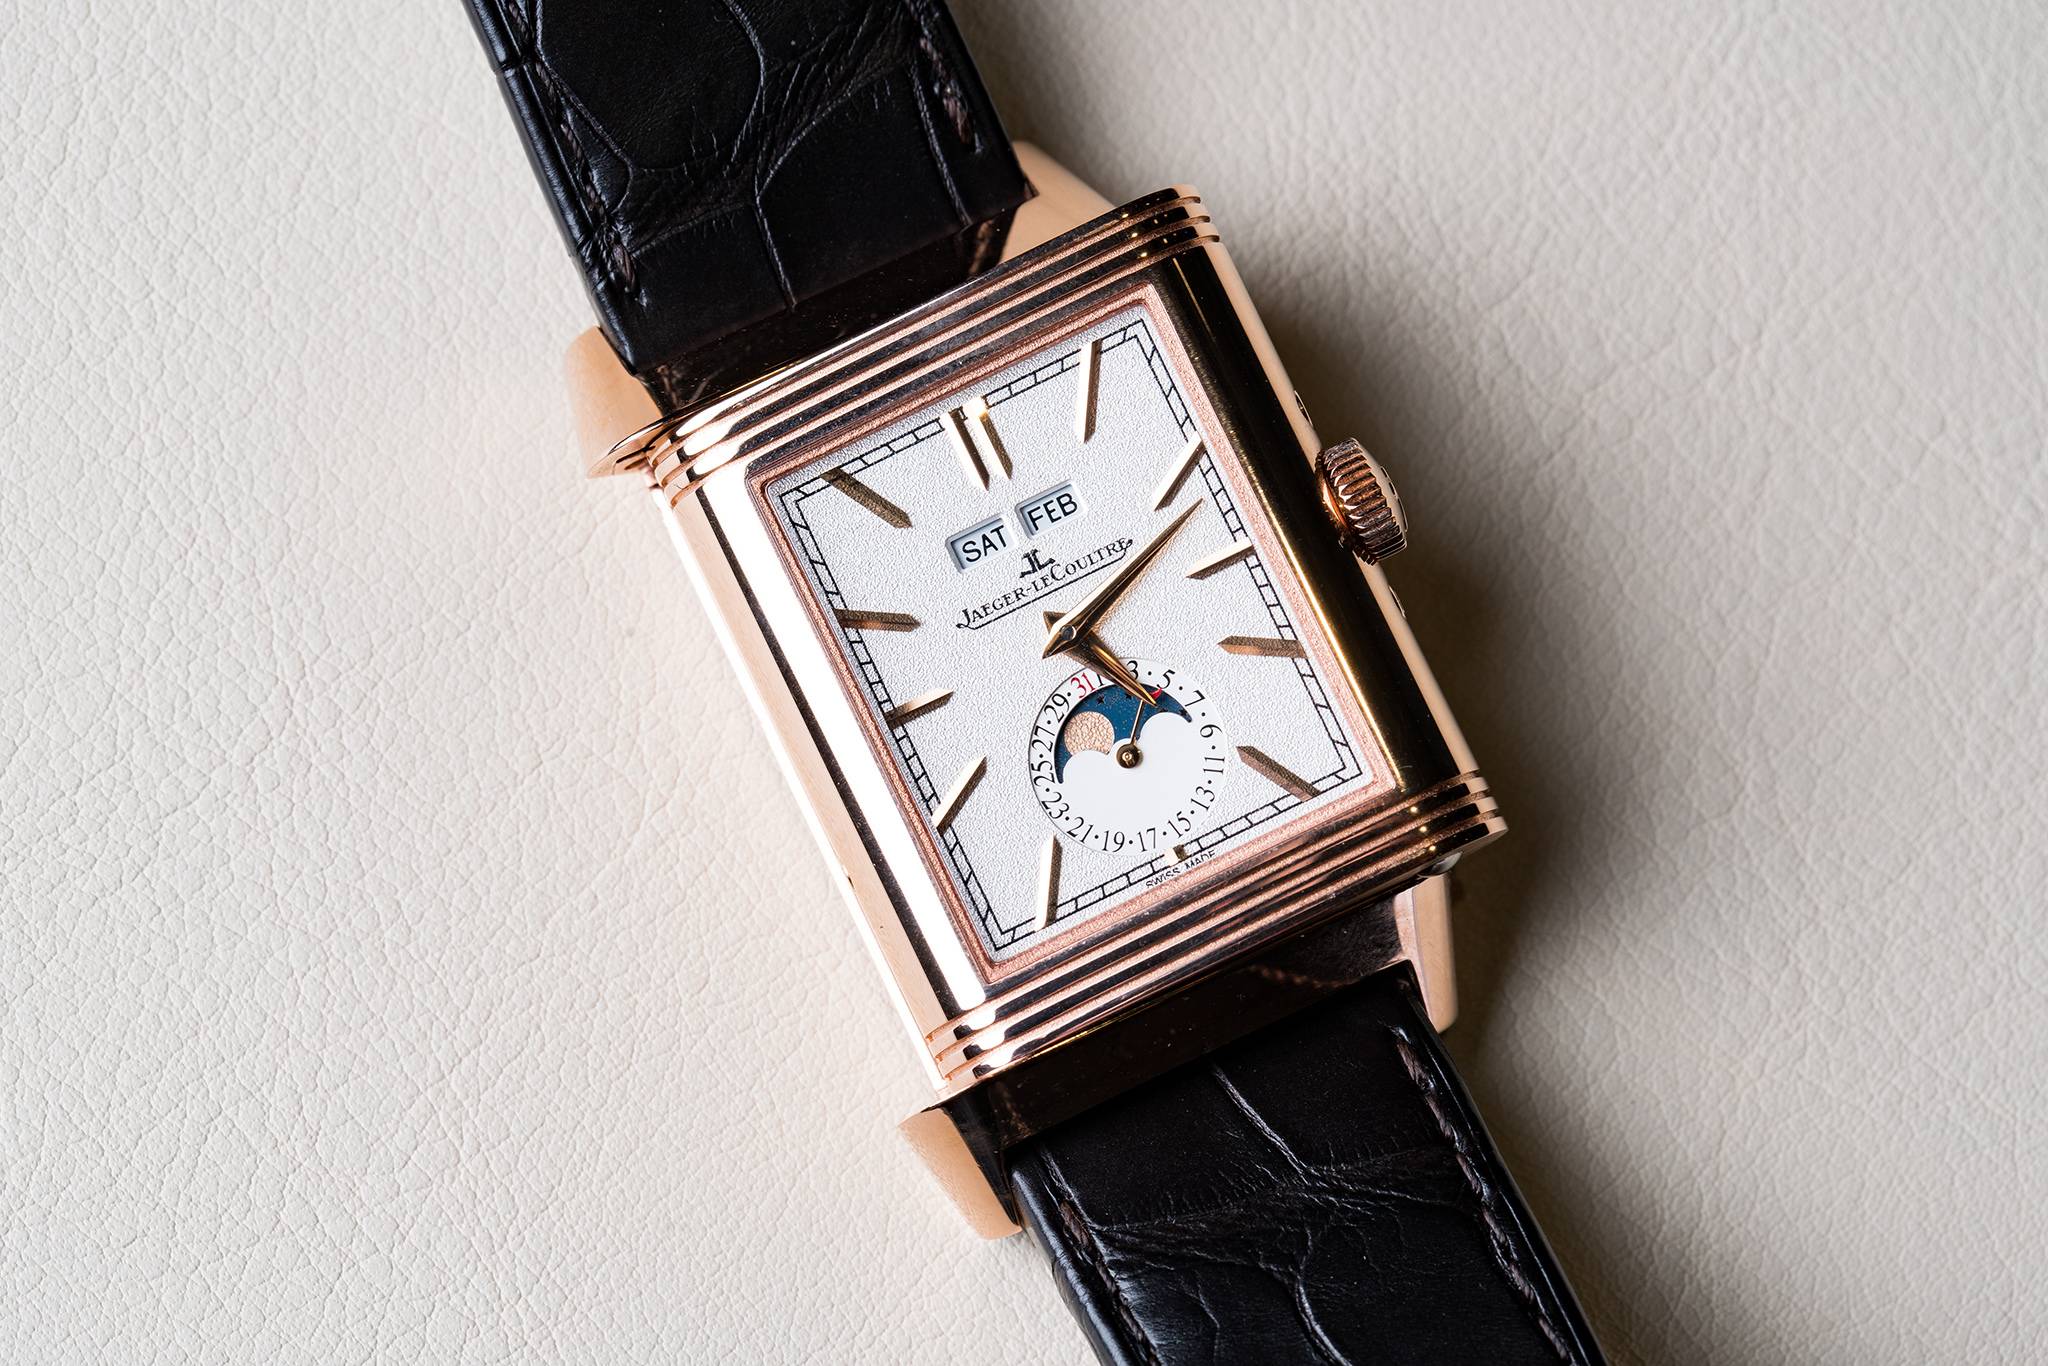 SIHH 2016 Novelties From Jaeger-LeCoultre